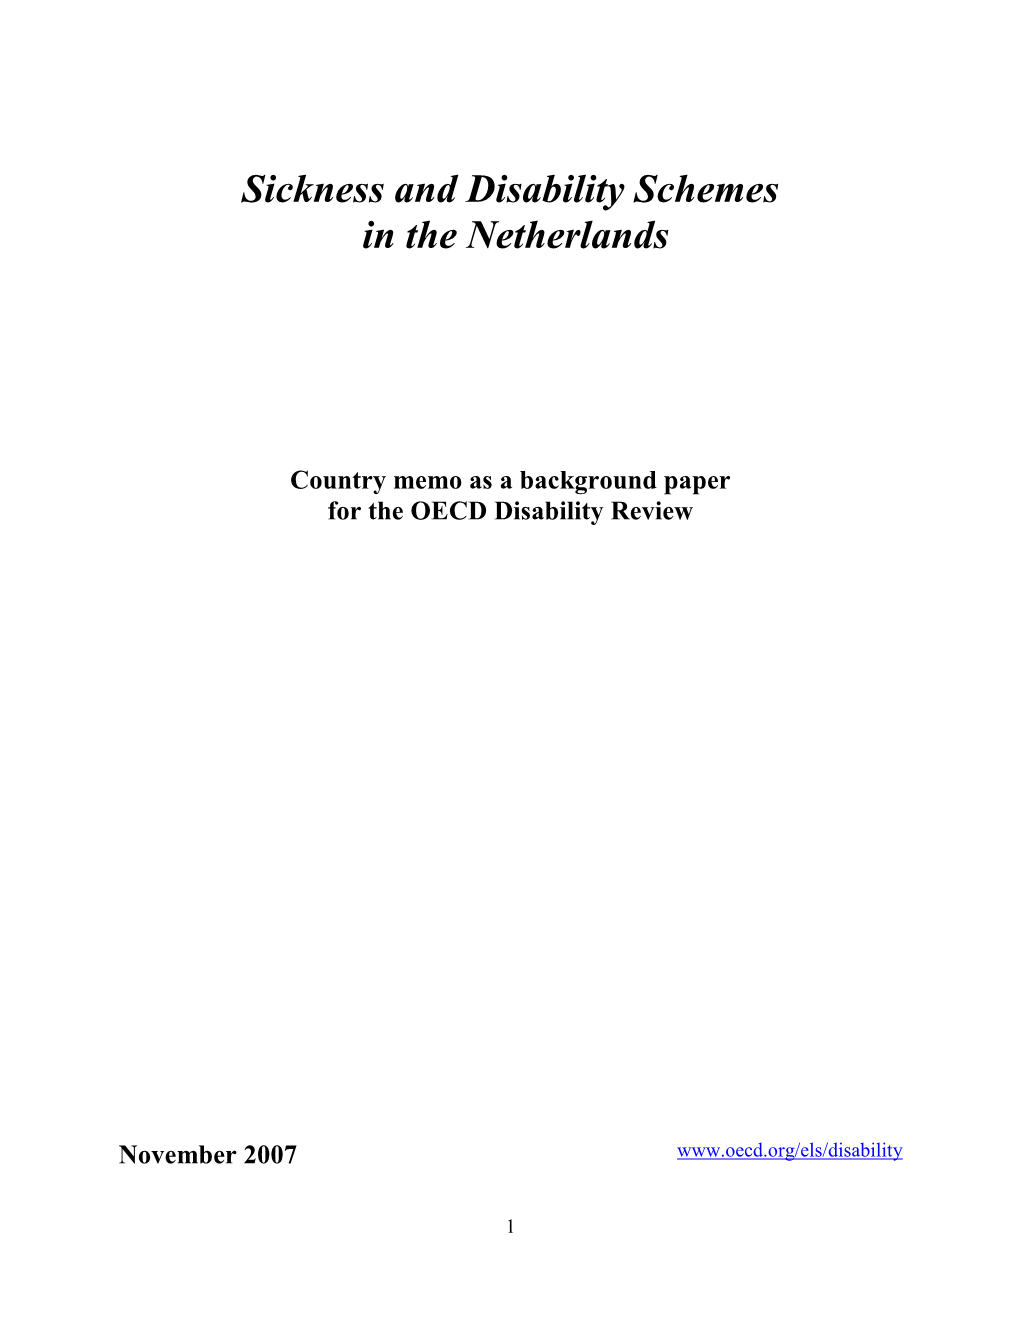 Sickness and Disability Schemes in the Netherlands